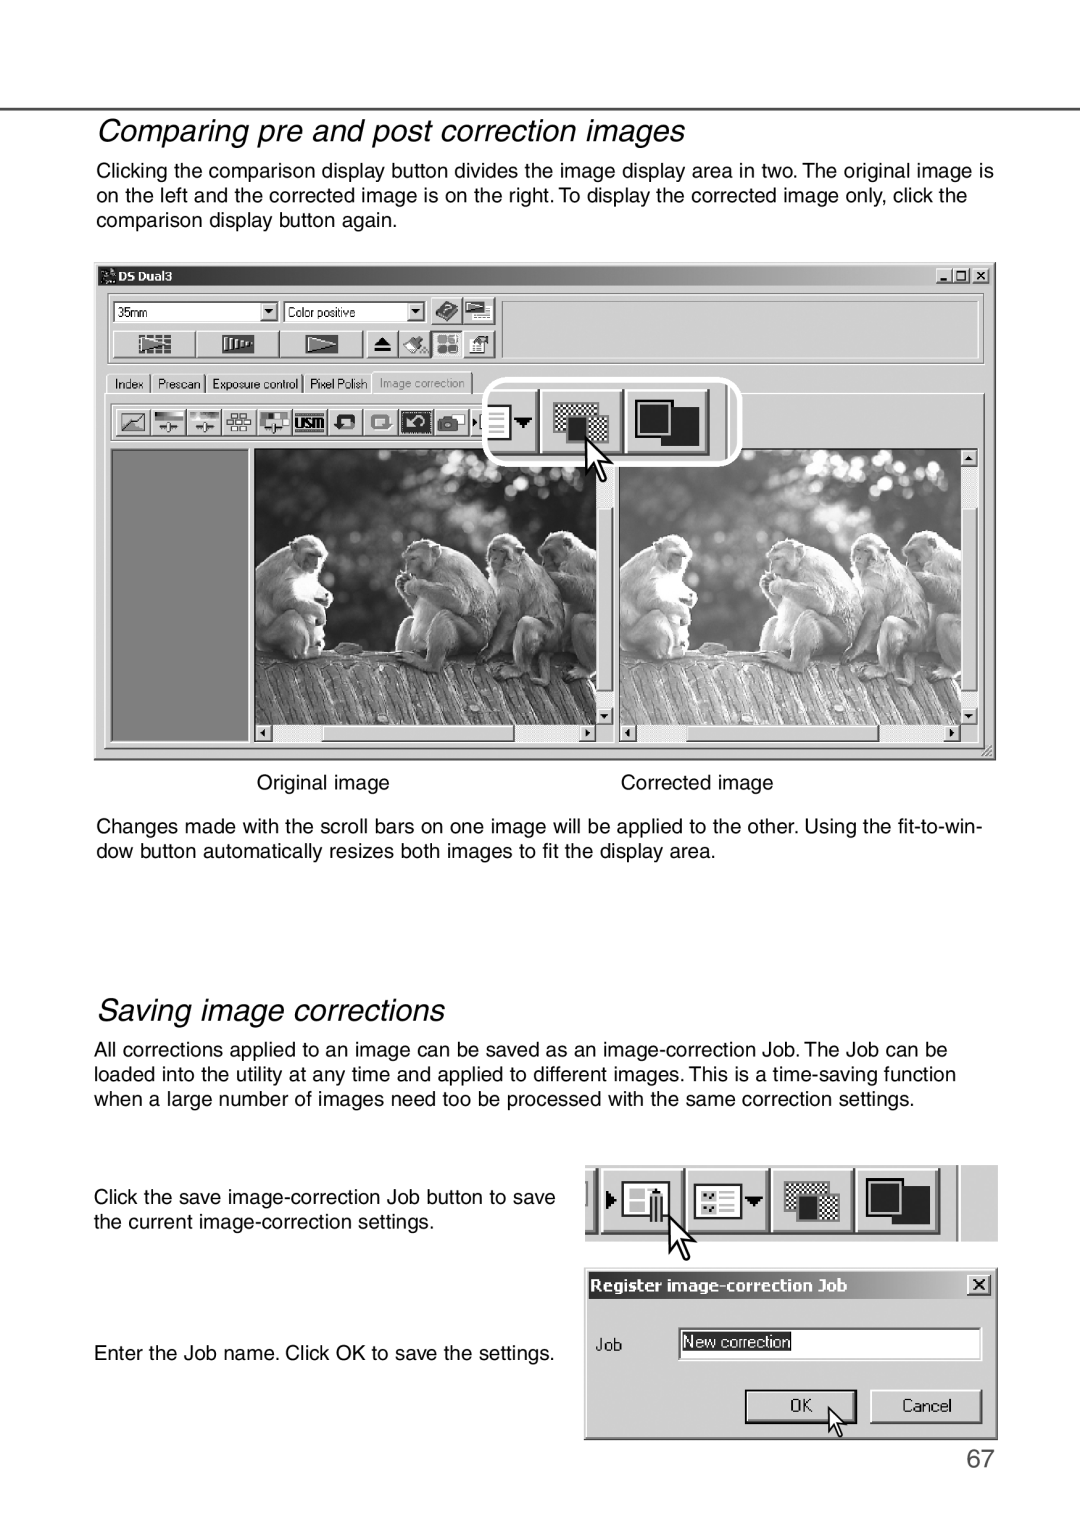 Konica Minolta AF-2840 instruction manual Comparing pre and post correction images, Saving image corrections 